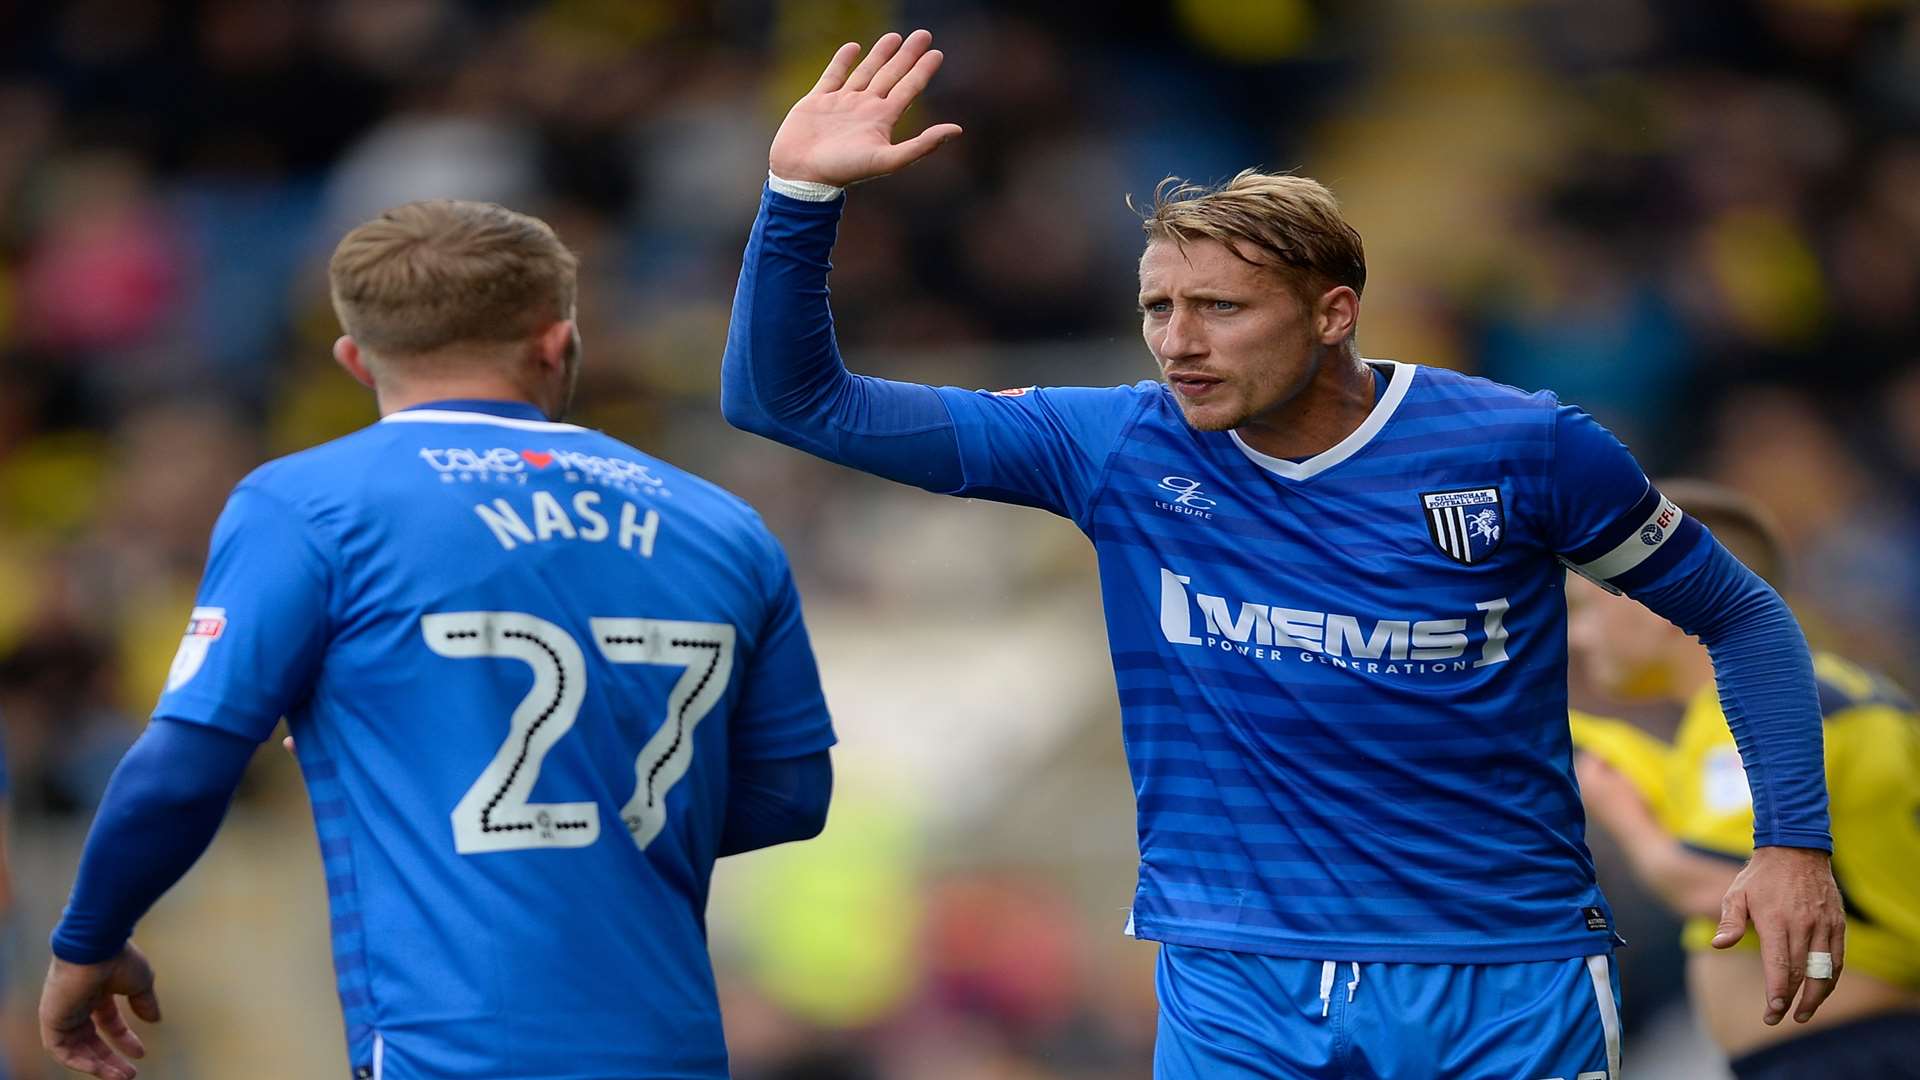 Gillingham captain Lee Martin has a difference of opinion with Liam Nash. Picture: Ady Kerry